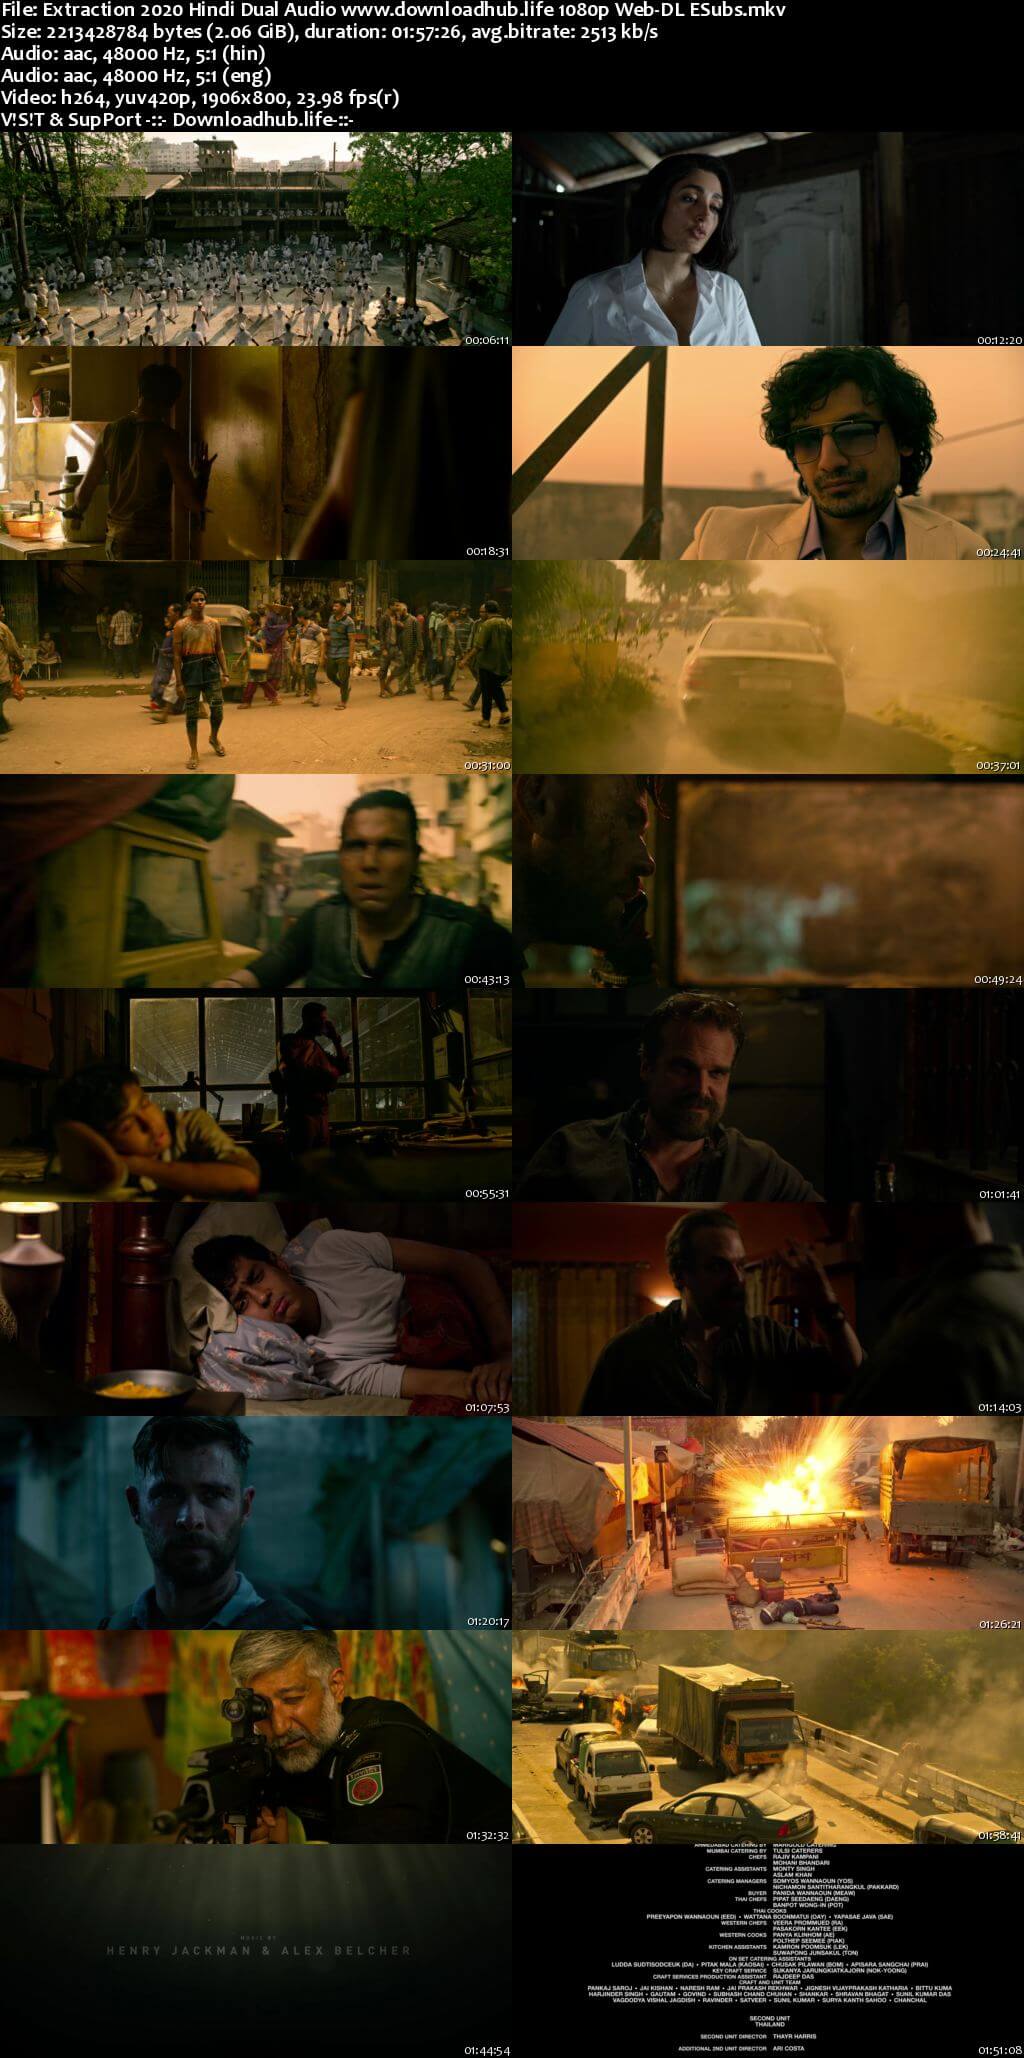 Extraction 2020 Hindi Dual Audio 1080p Web-DL ESubs